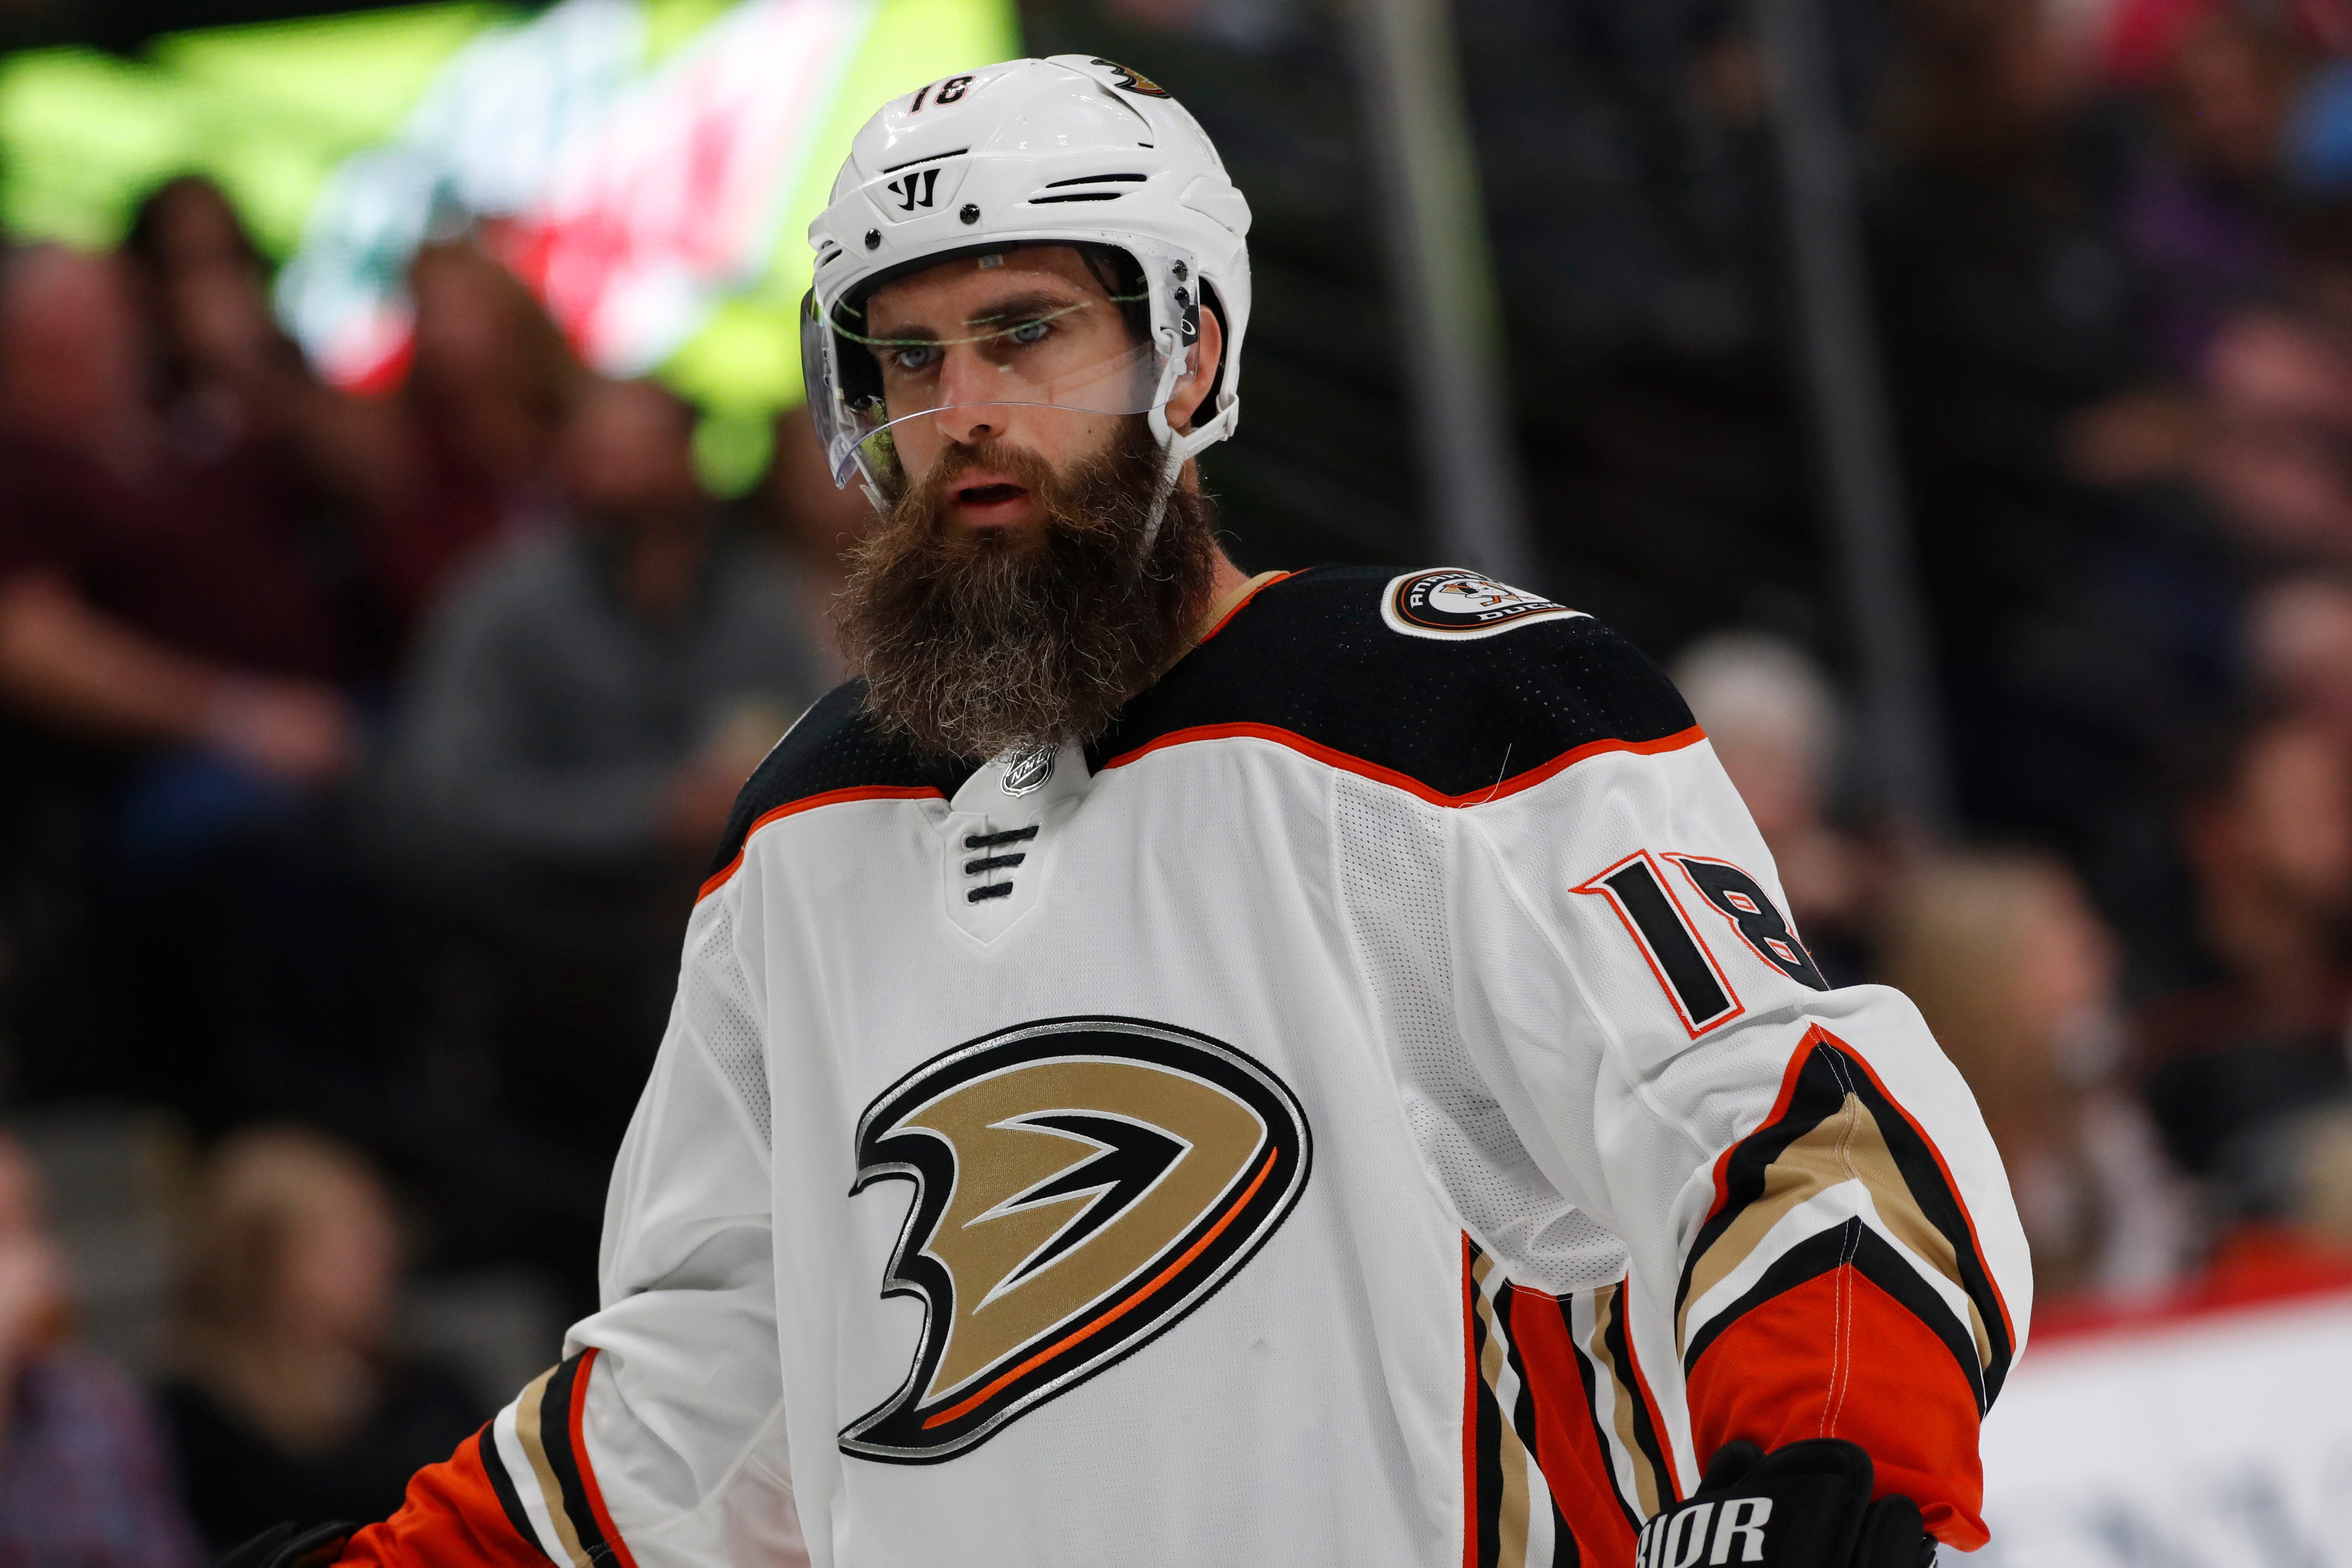 Ducks forward Patrick Eaves diagnosed with Guillain-Barré syndrome